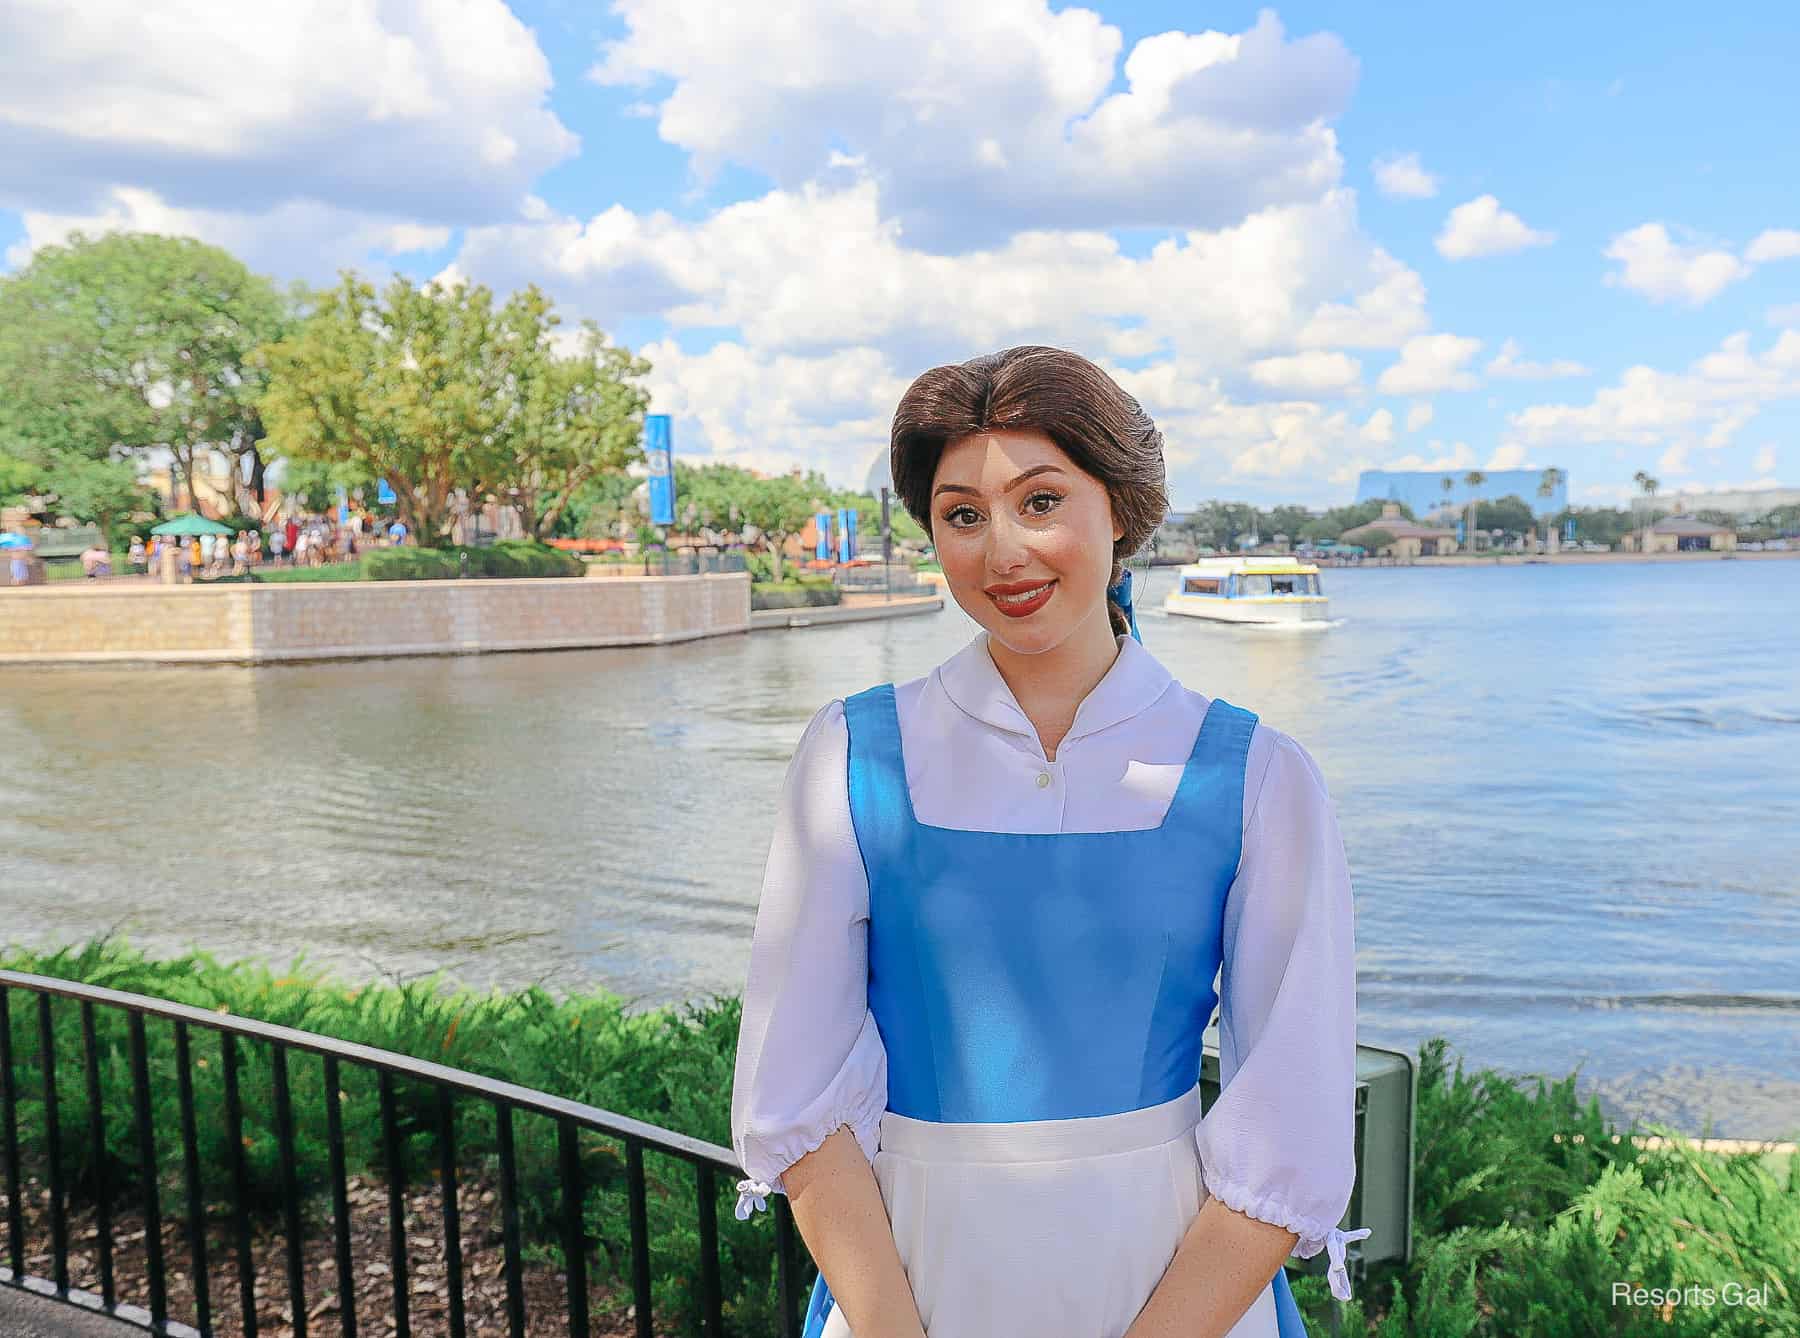 Belle wearing a blue dress with white pinafore apron. 